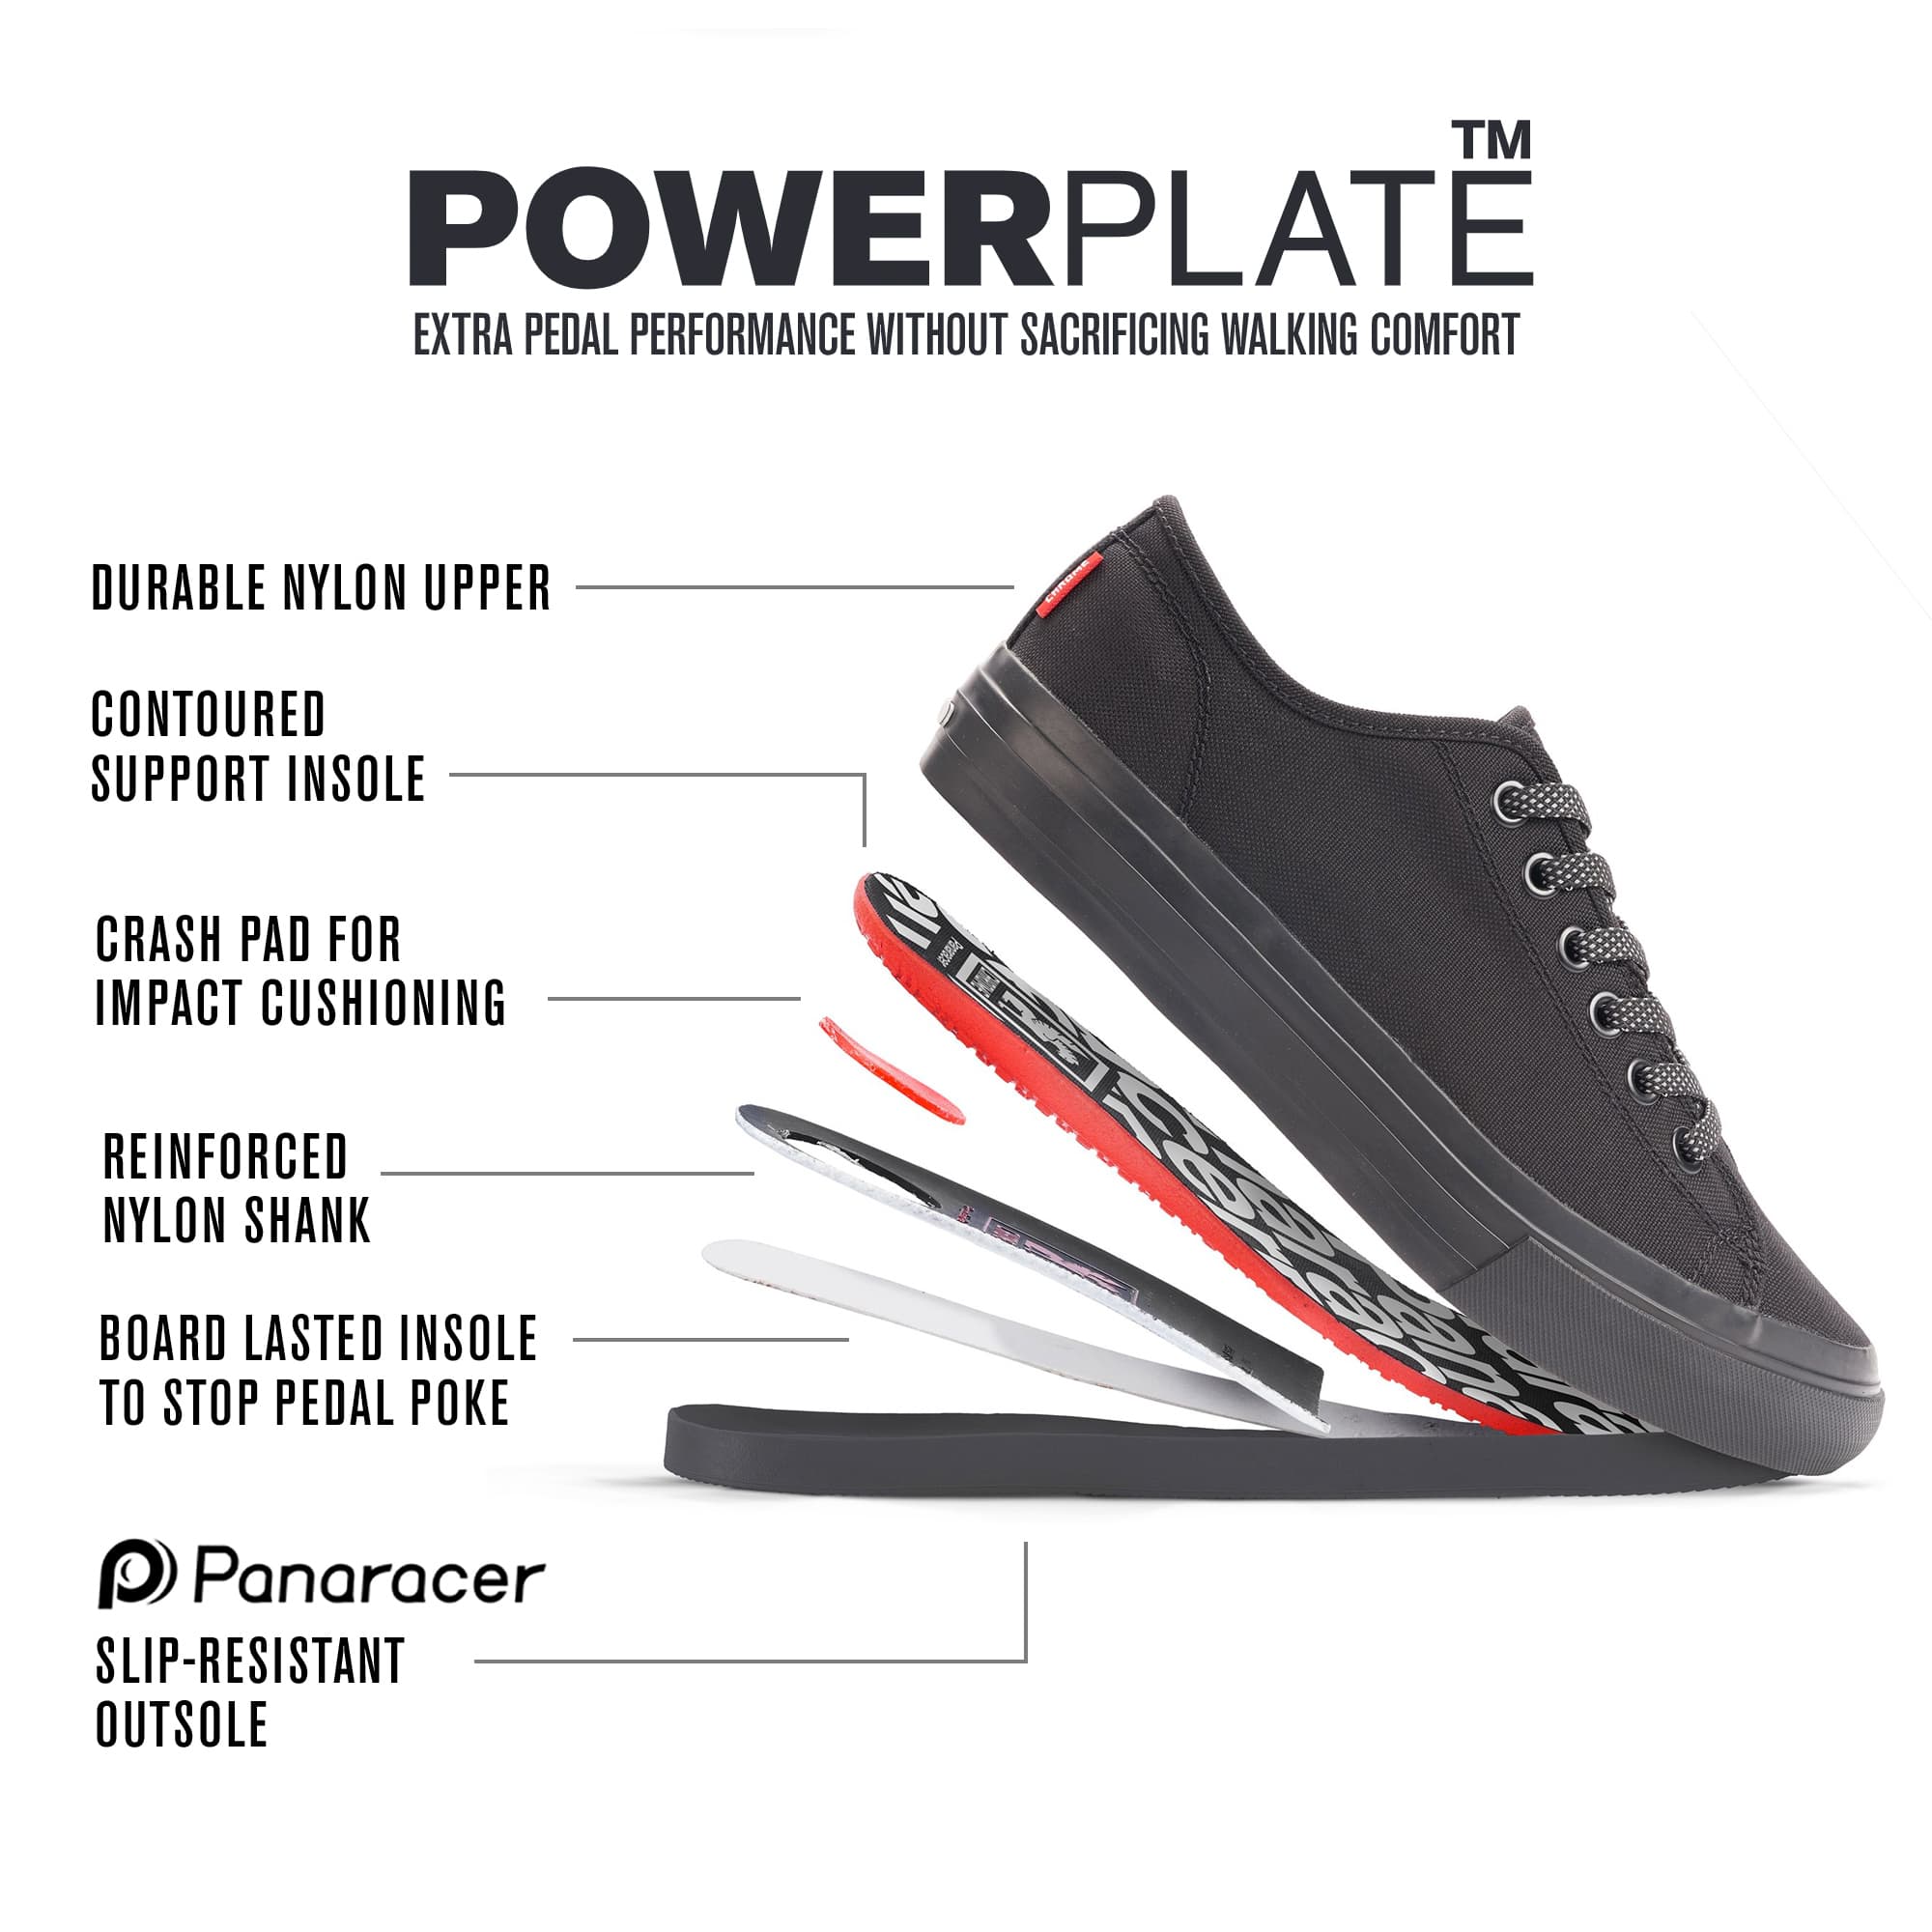 Power plate shank, showing how it sits in the shoe